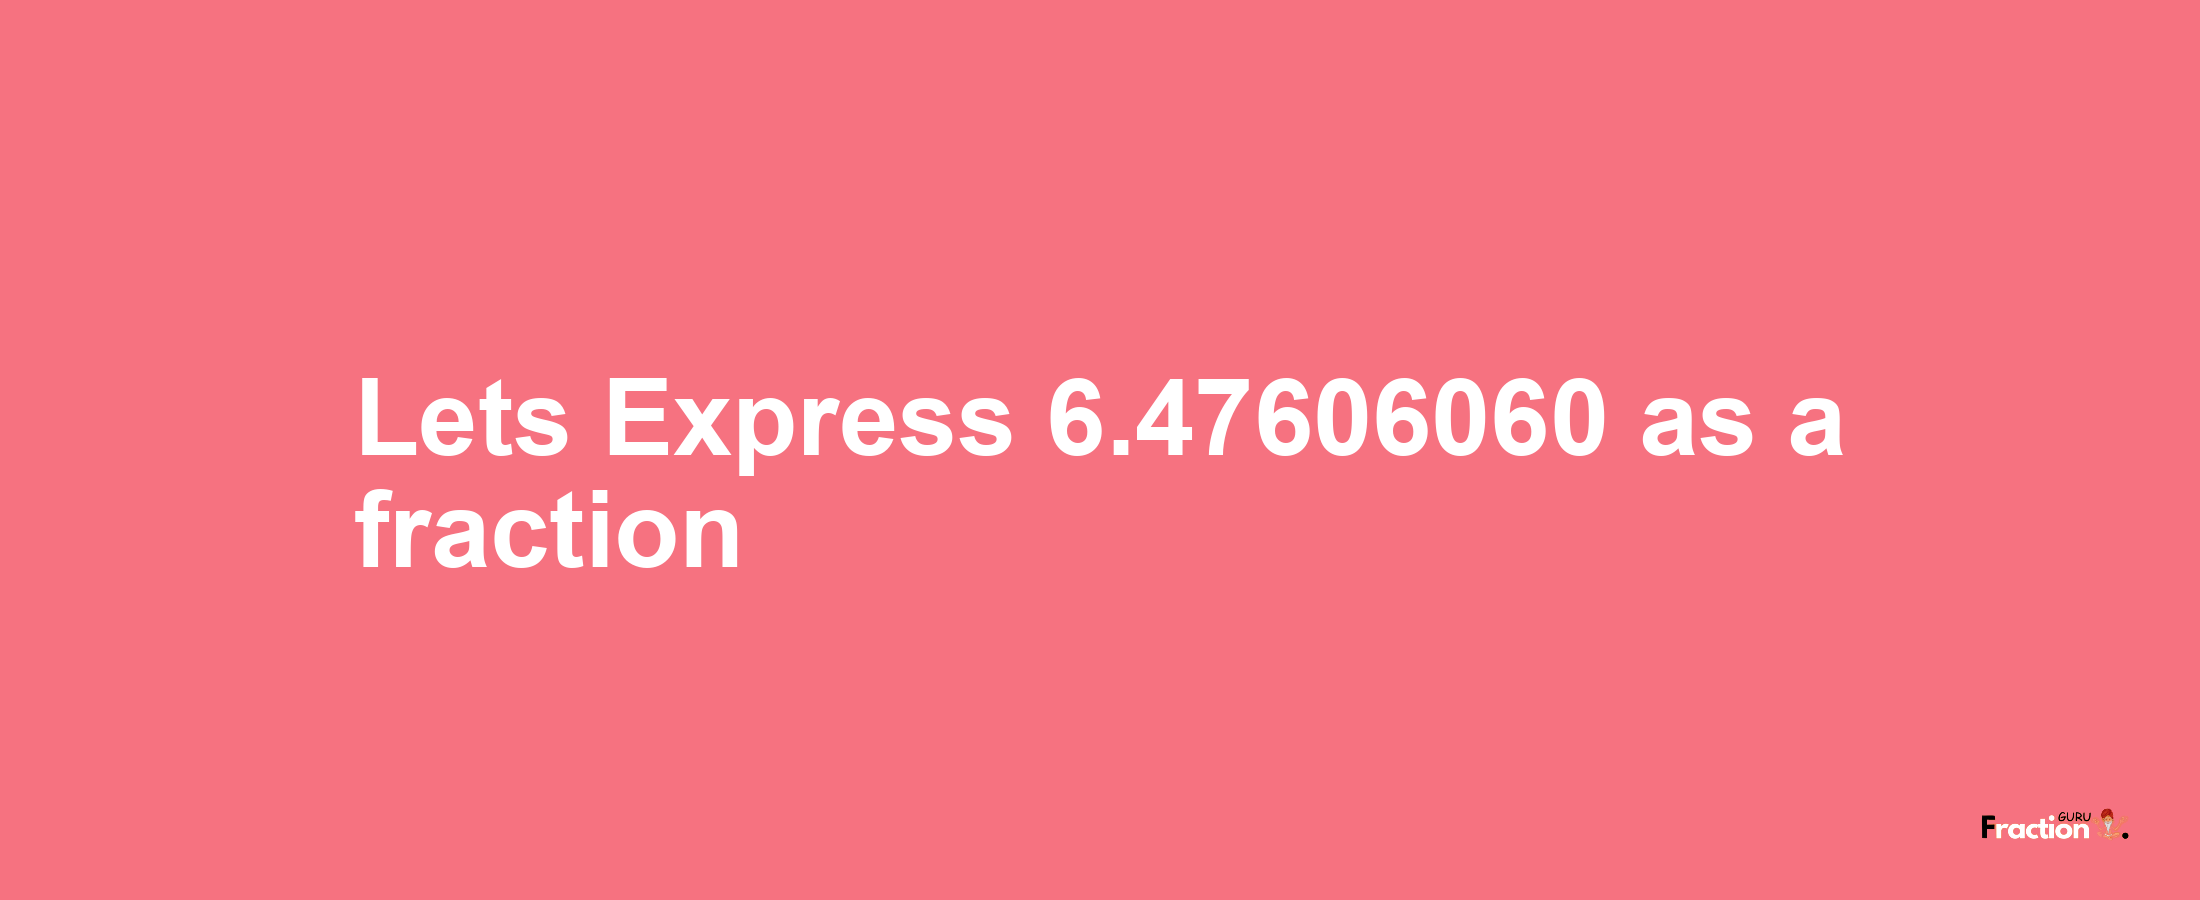 Lets Express 6.47606060 as afraction